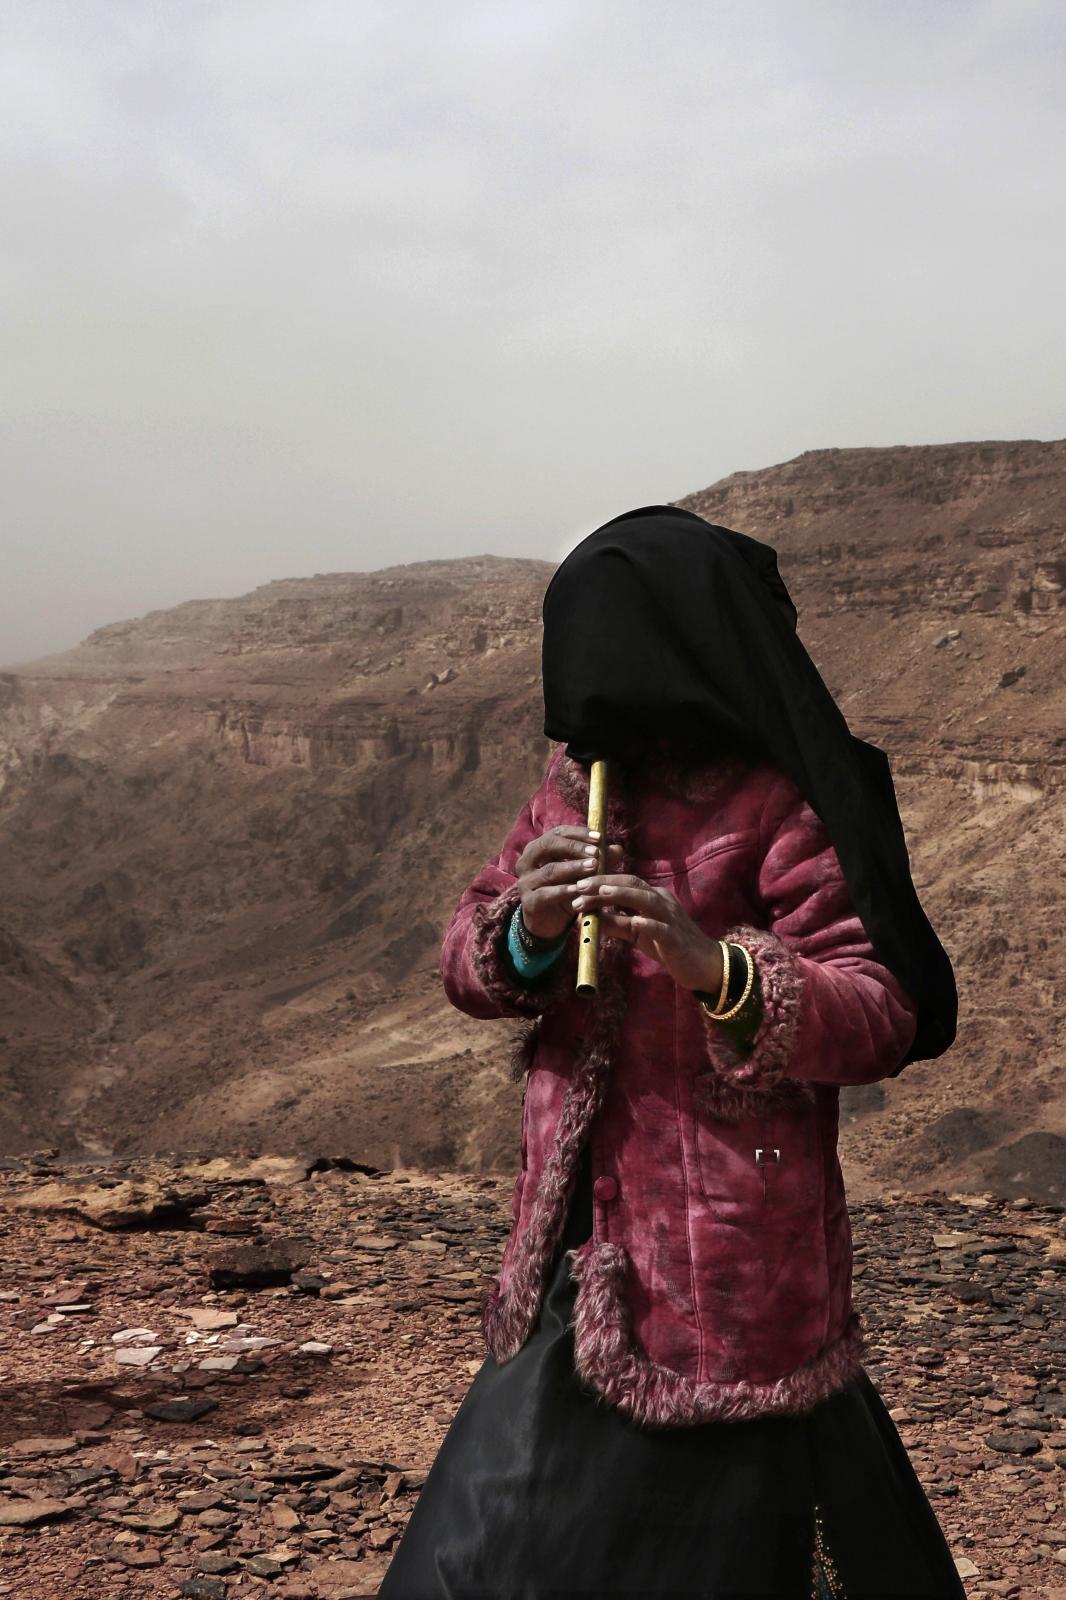 Bedouin women lead first tour in Egypt’s Sinai - Aicha, from the Hamada tribe and one of the first female...